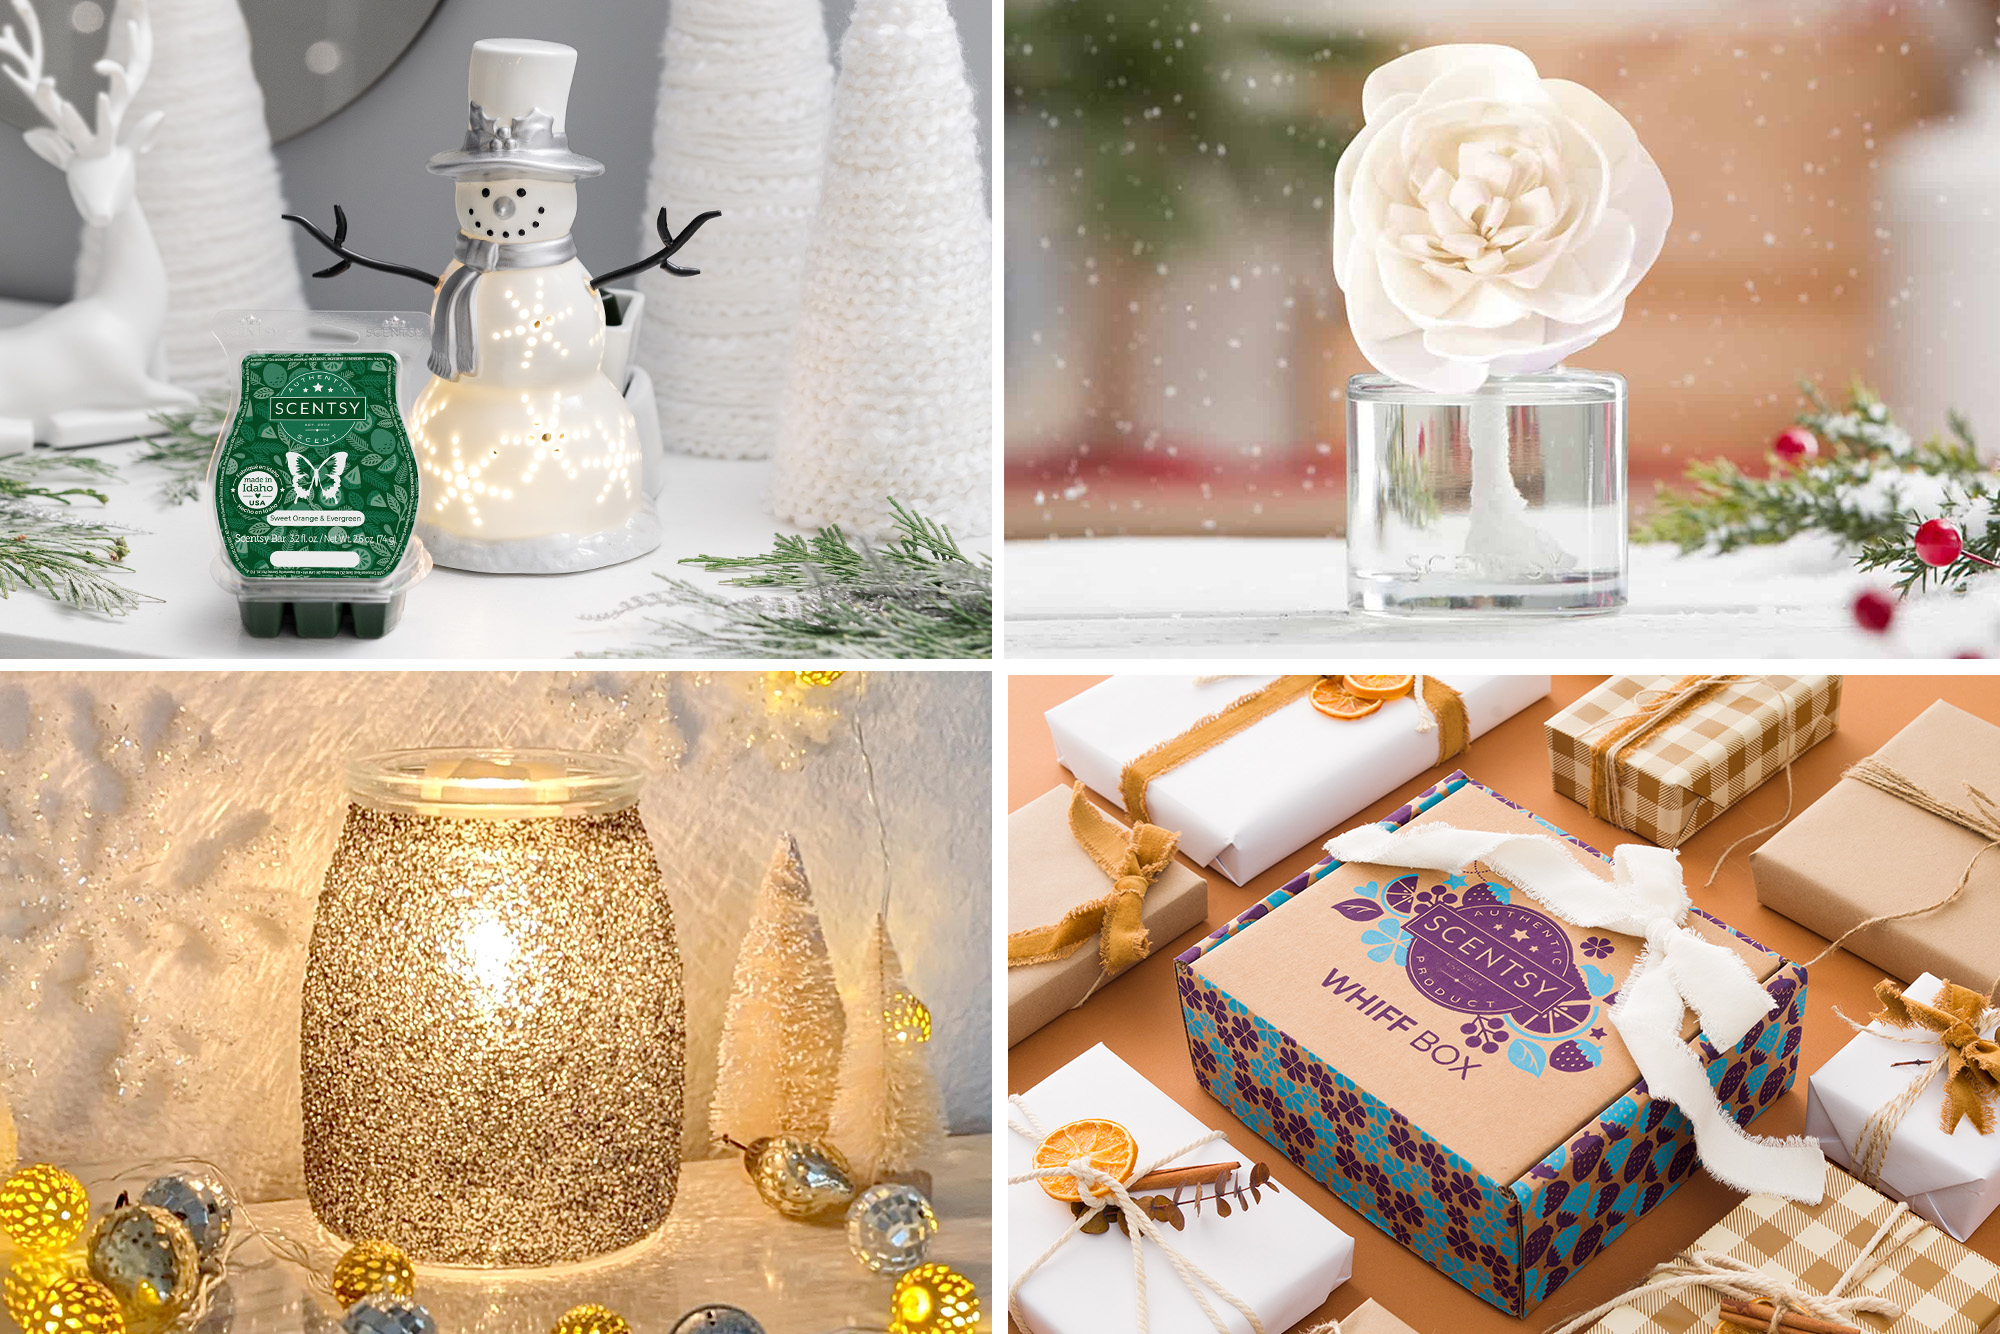 Scentsy’s seven favorite (and fragrant!) holiday gift ideas